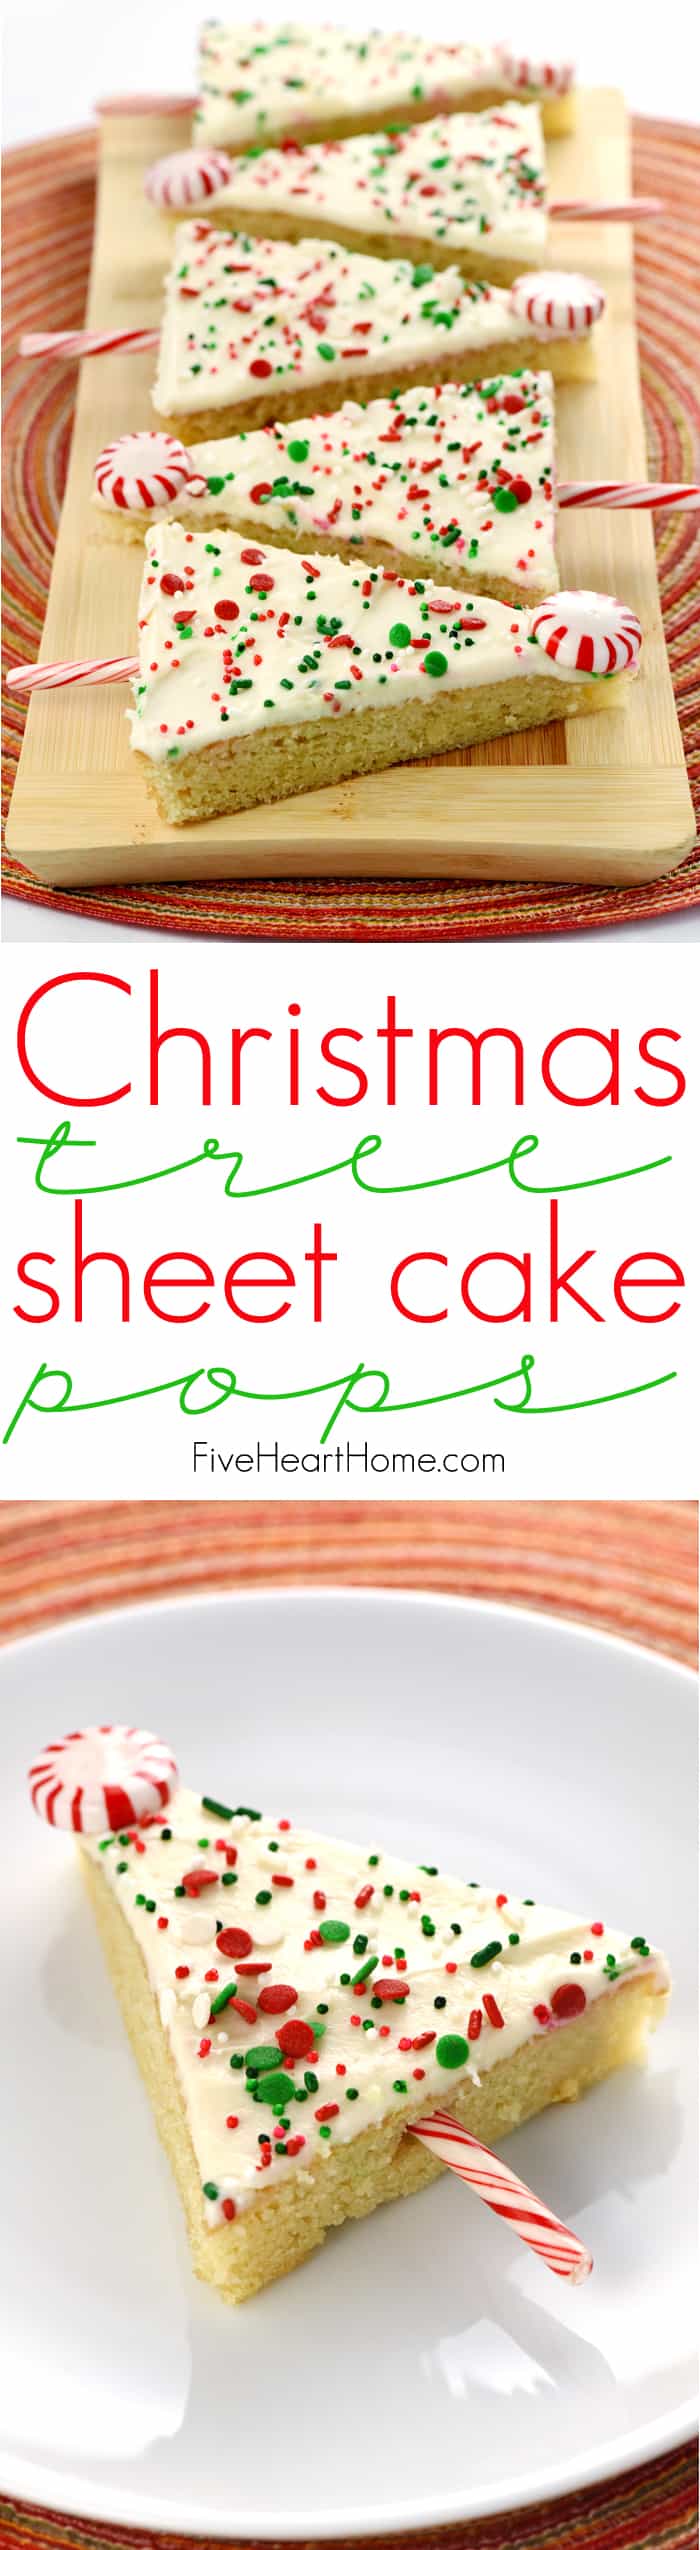 Christmas Sheet Cake ~ tender vanilla sheet cake is slathered in cream cheese frosting, showered with sprinkles, cut into triangles, and embellished with candy canes to make cute & festive Christmas trees! These treats are perfect for any holiday party or Christmas cookie platter! | FiveHeartHome.com via @fivehearthome